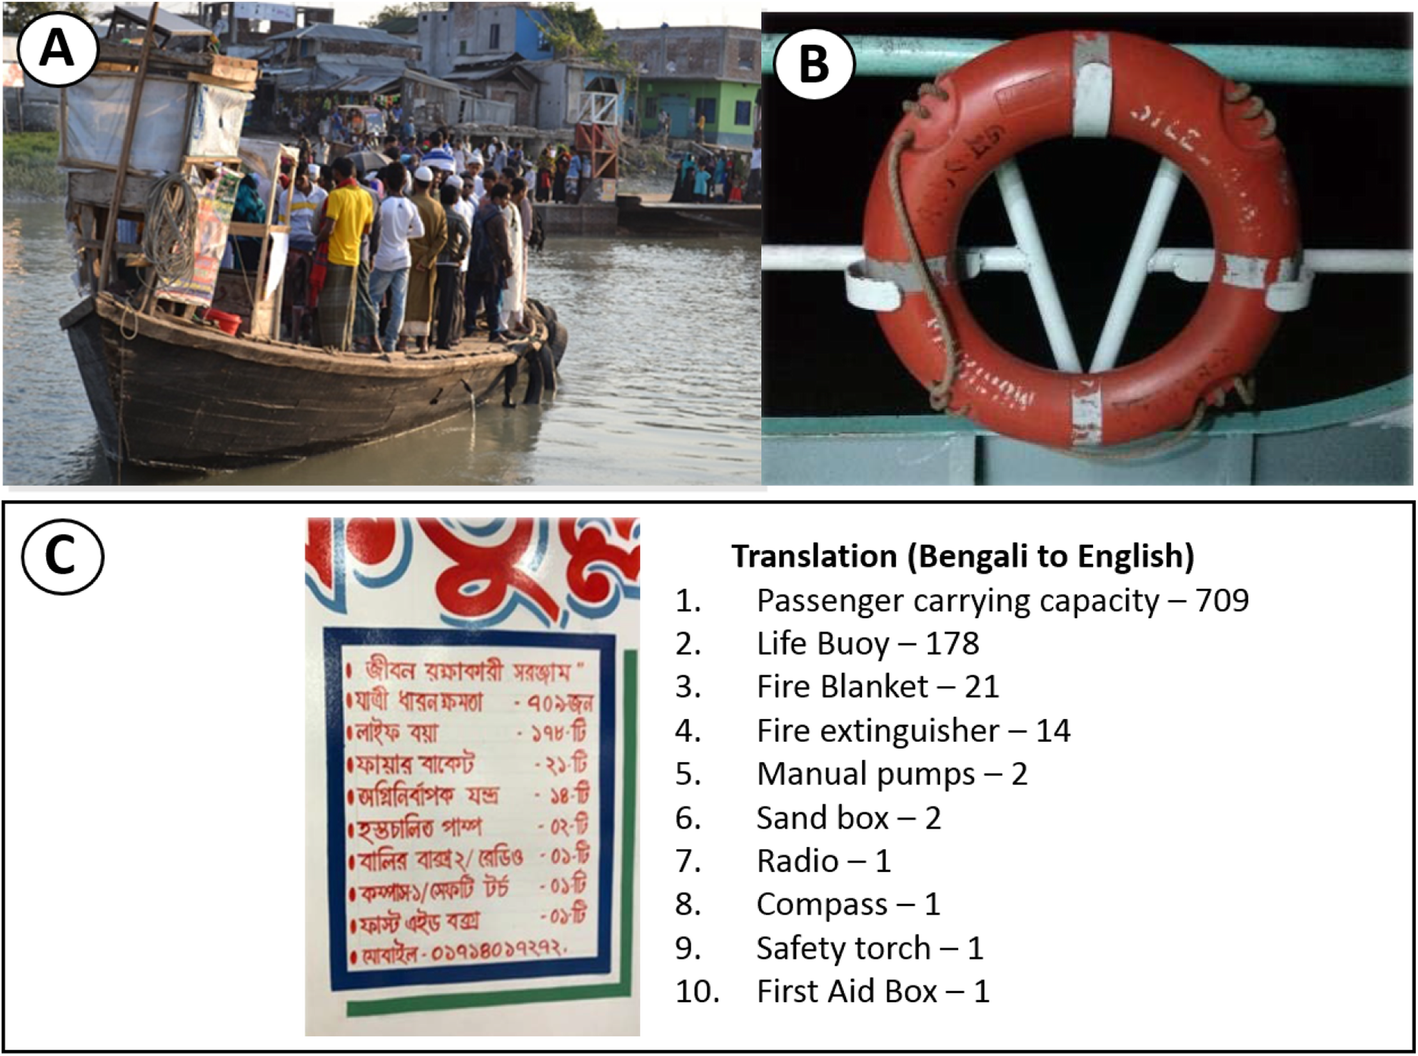 Context of water transport related drownings in Bangladesh: a